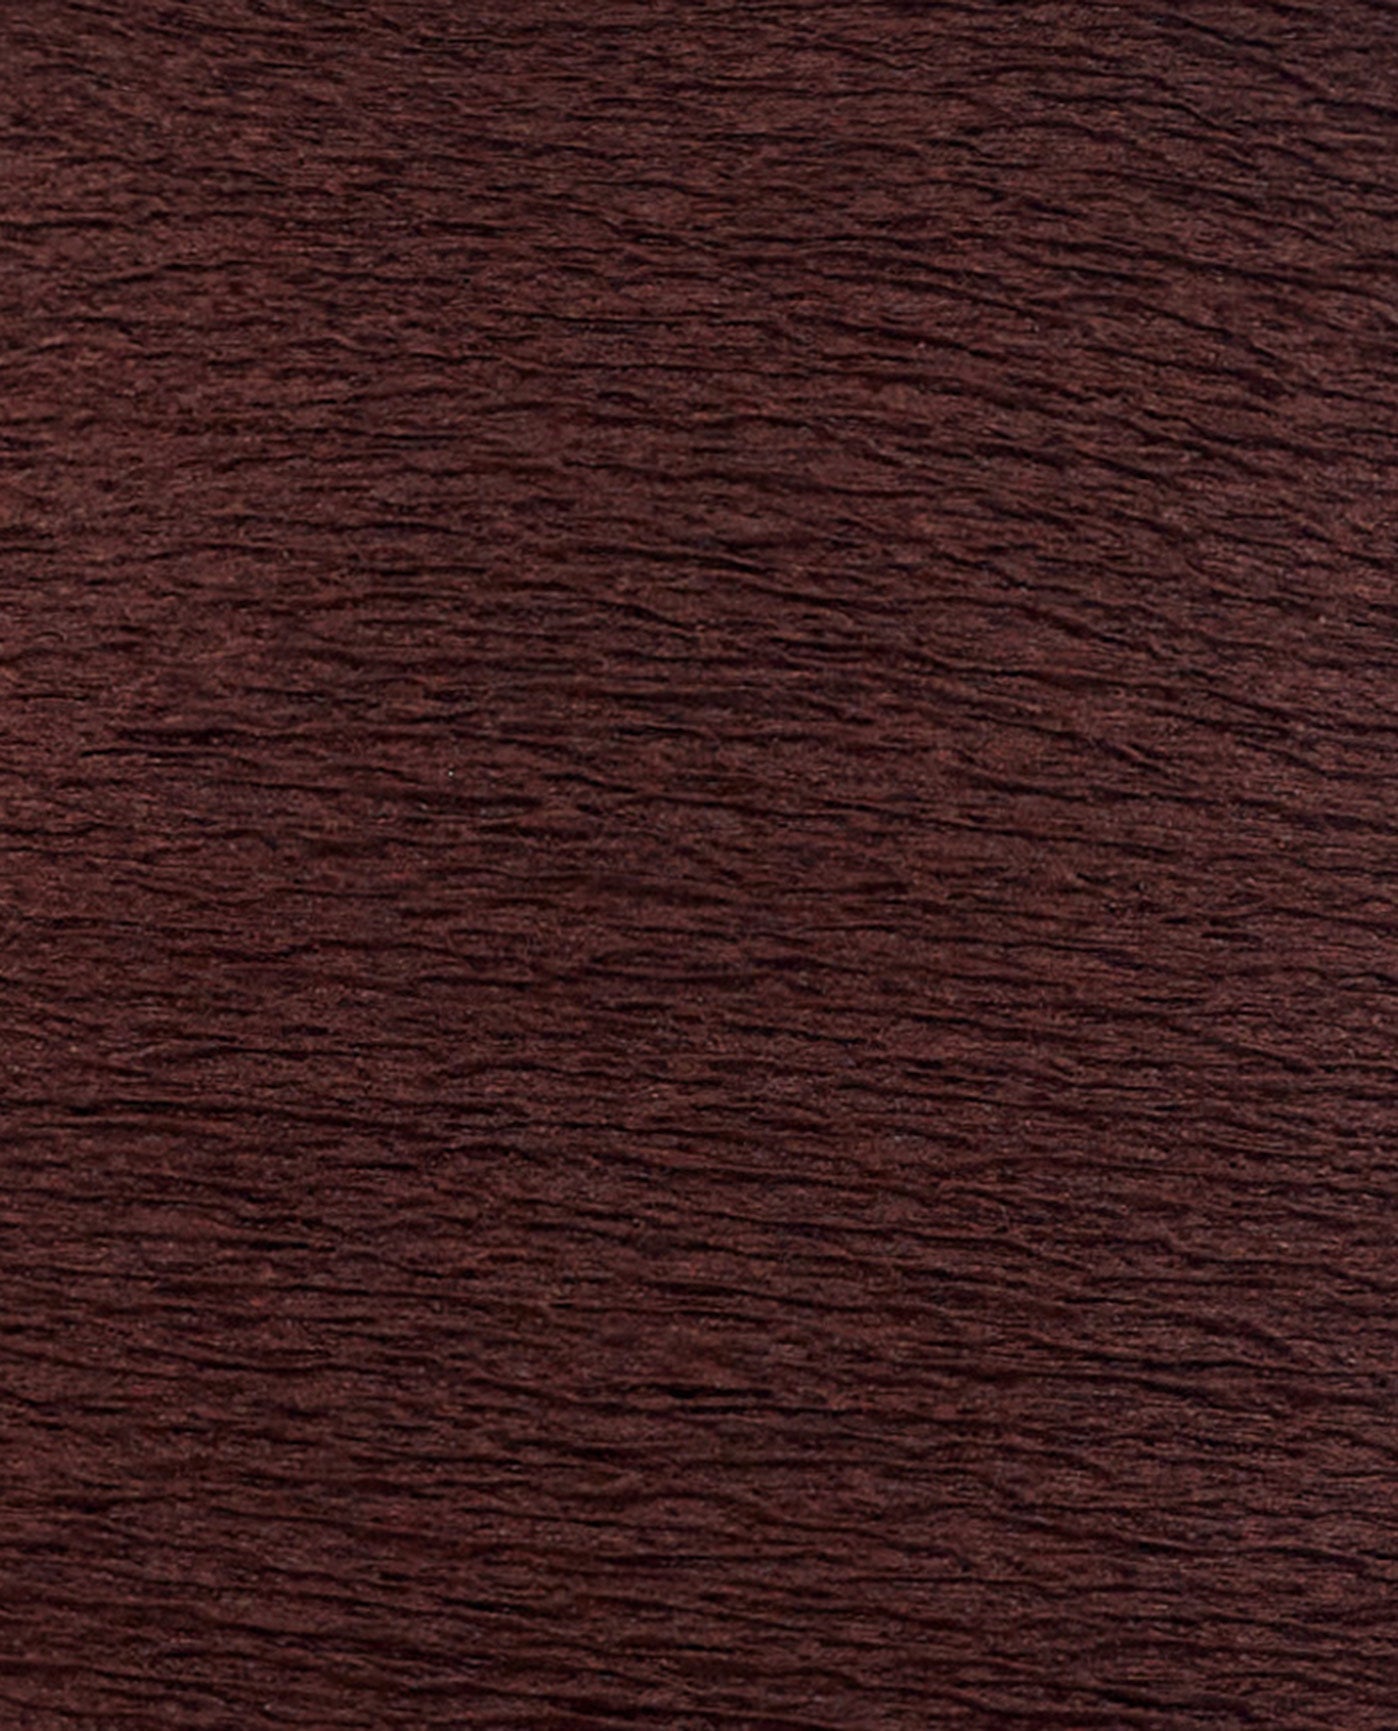 FABRIC SWATCH VIEW OF CHLORINE RESISTANT KRINKLE TEXTURED SOLID HIGH NECK ONE PIECE | KRINKLE BROWN